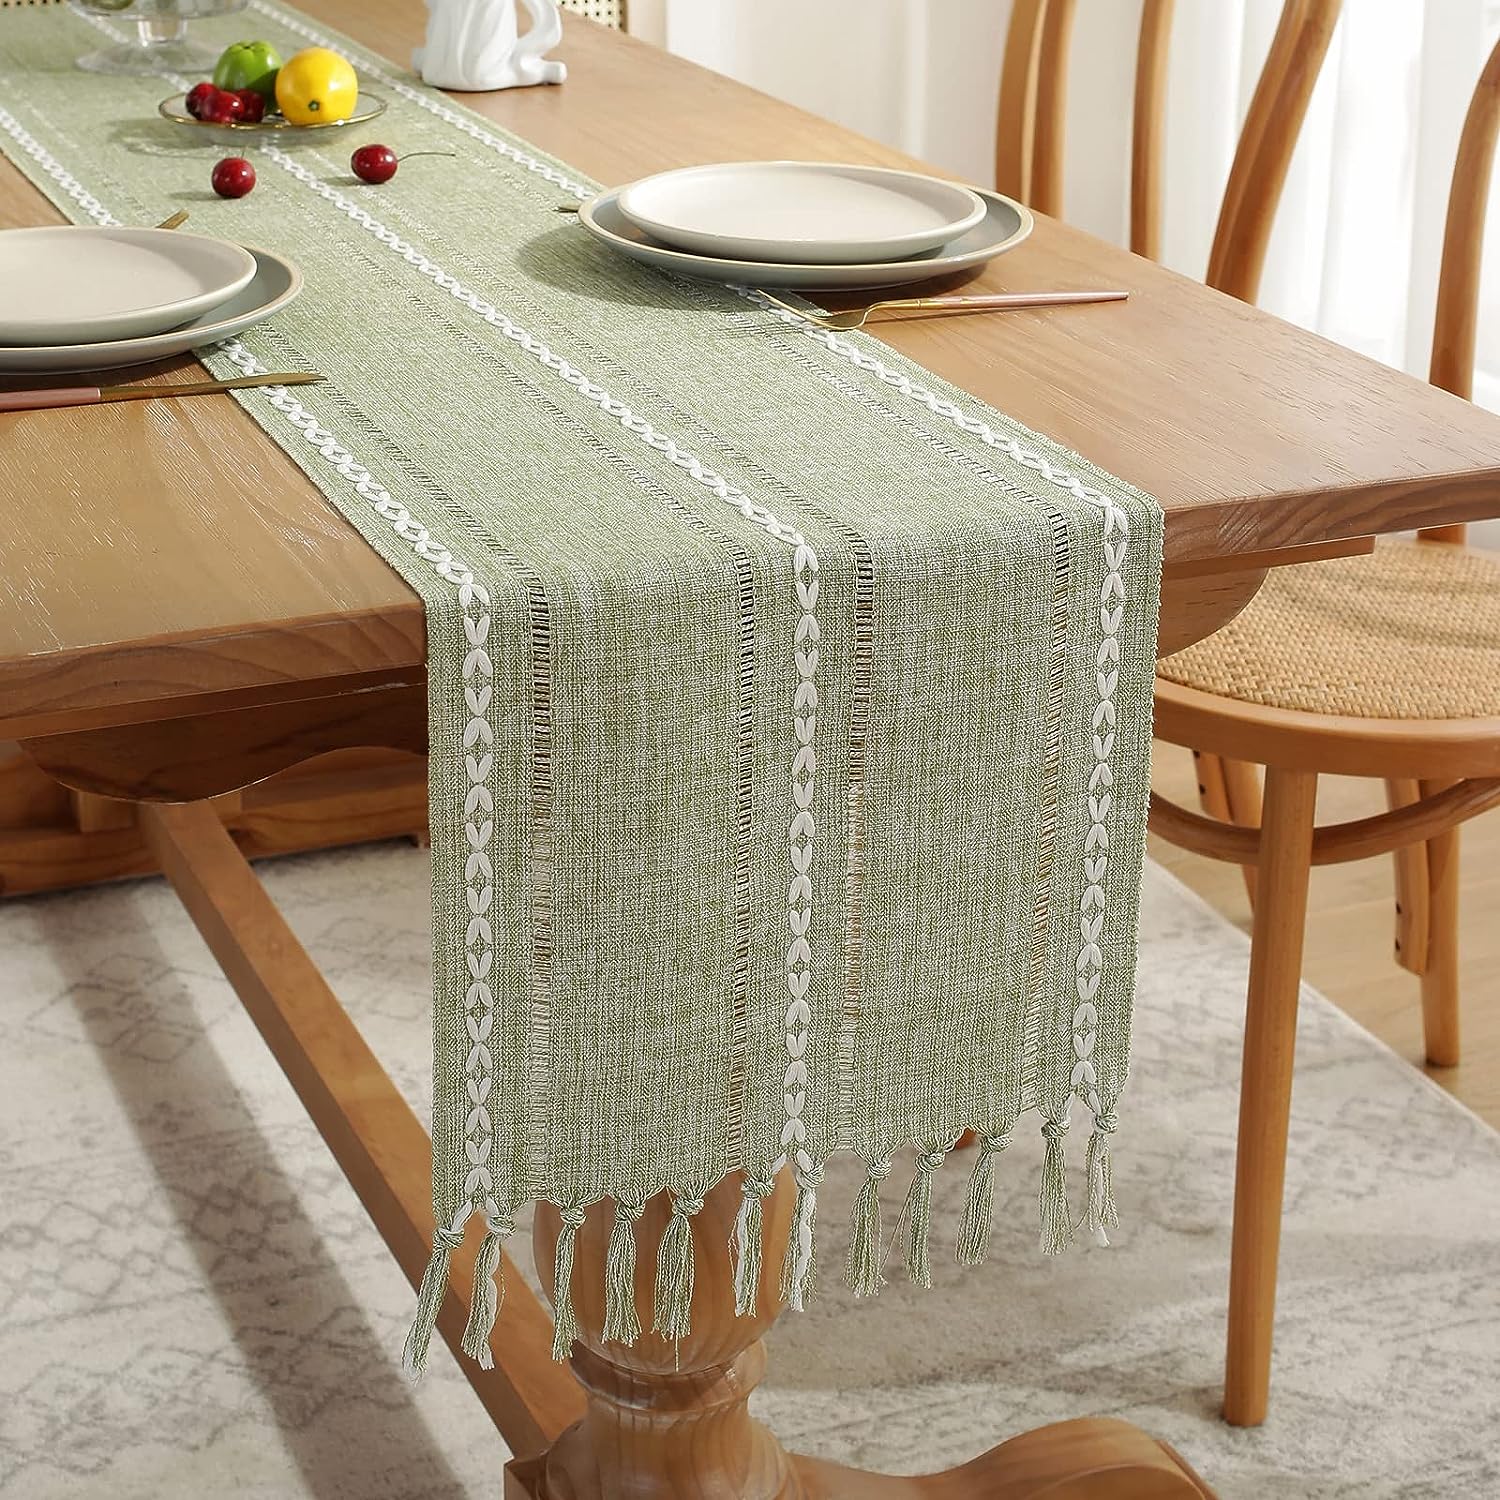 Wracra Hemstitch Cotton Linen Table Runner Farmhouse Style Sage Green Table Runner 180cm Long with Hand-tassels for Dining Kitchen Party and Dessert Table Decor(Sage Green, 180cm) 6